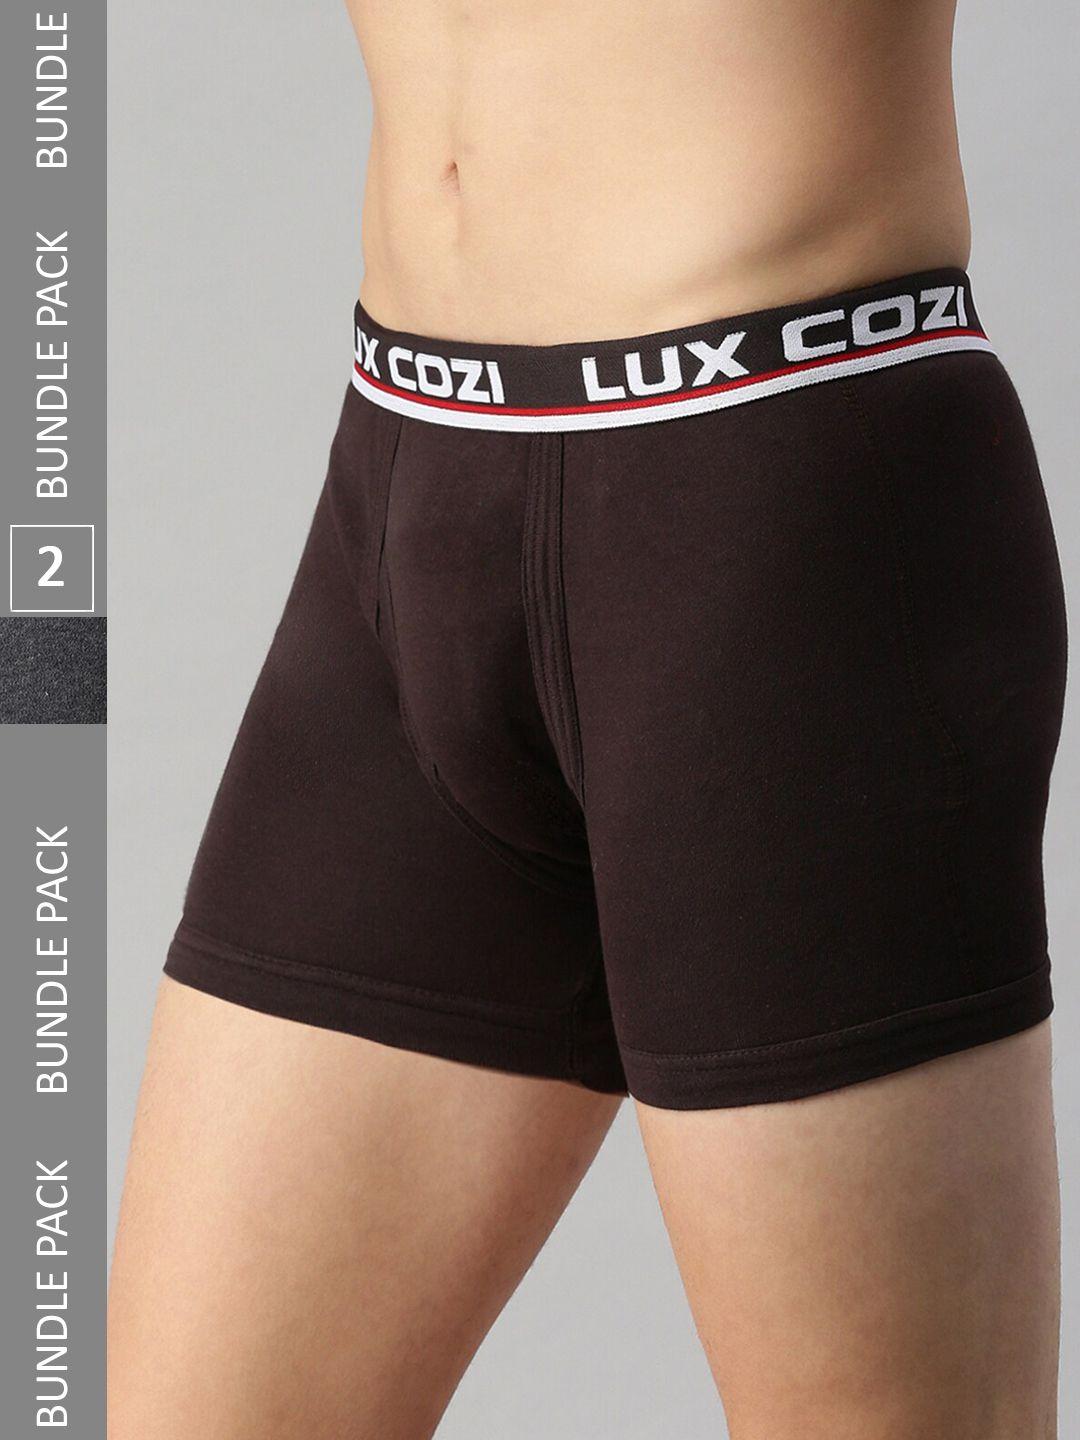 lux cozi pack of 2 ribbed cotton sleek and comfortable trunks